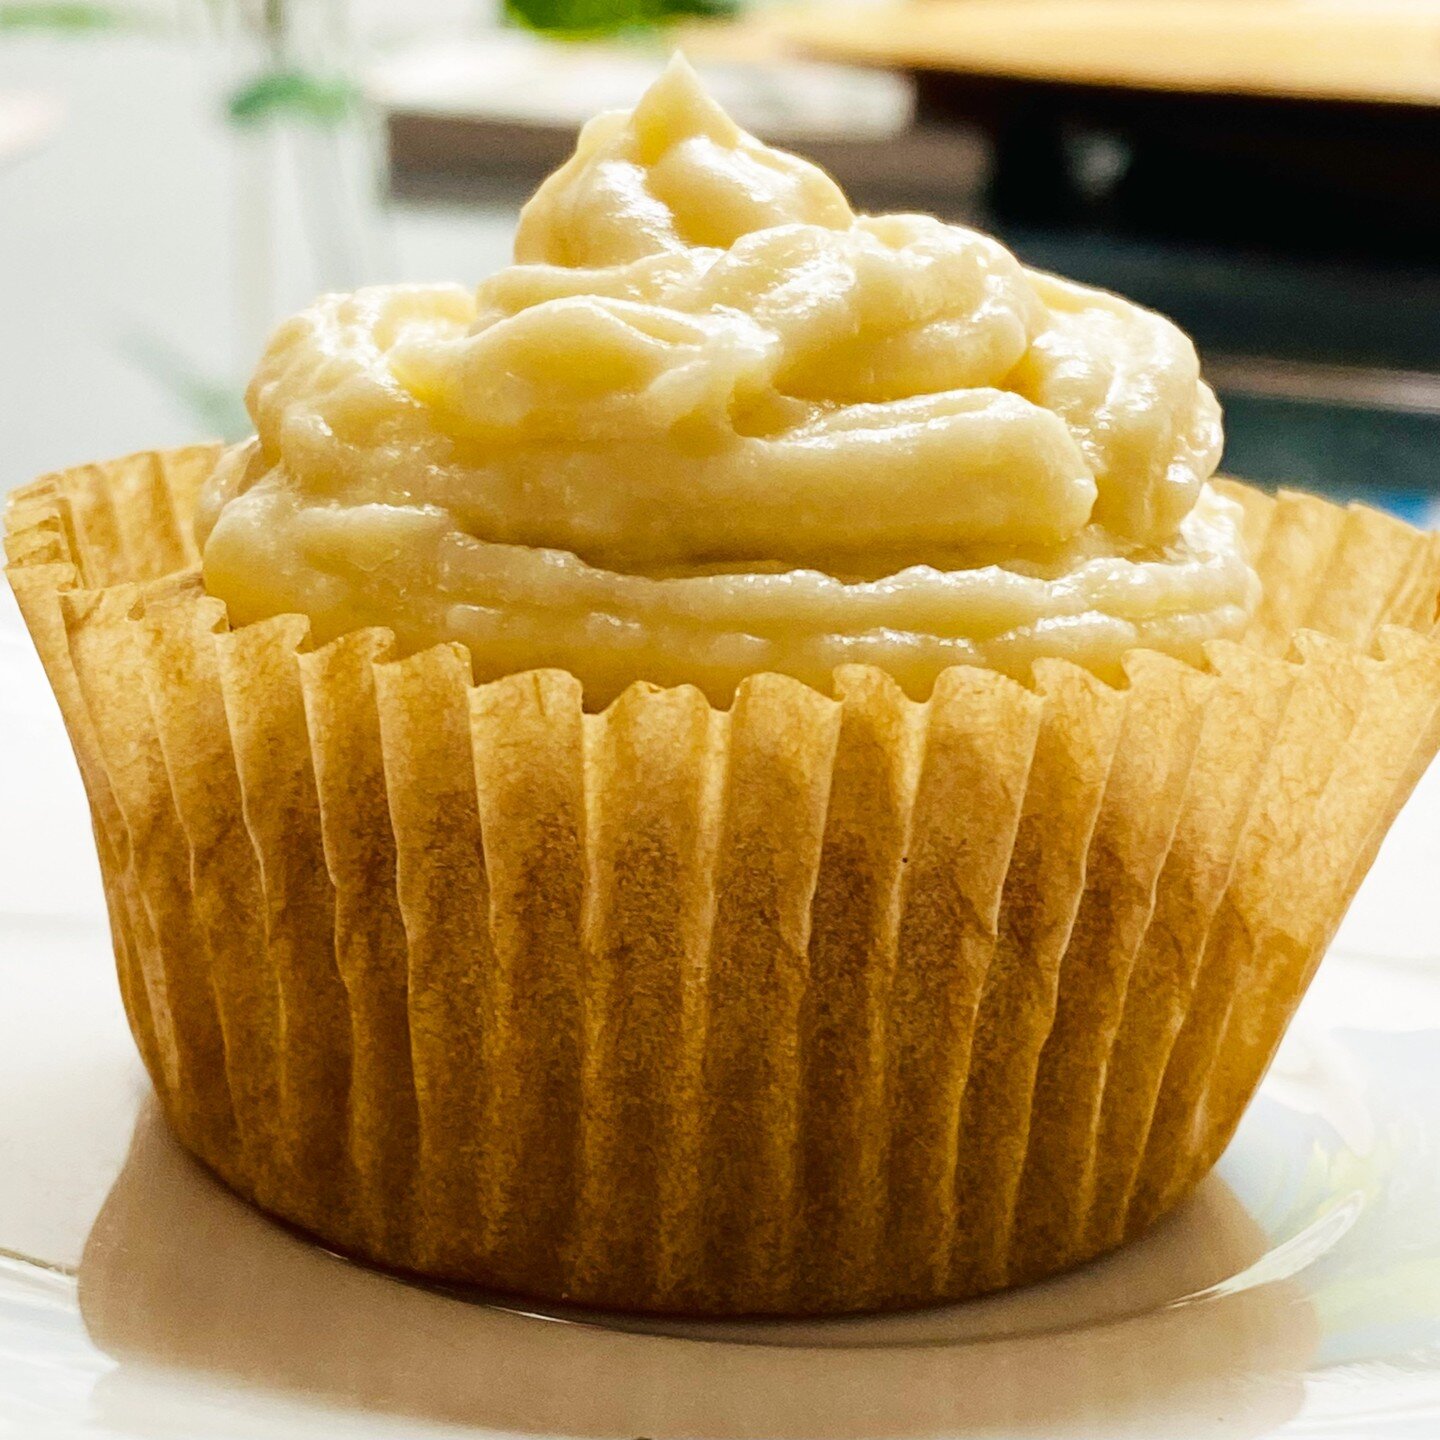 Hello crown community! I was baking a delicious batch of vanilla cupcakes with matching frosting when someone asked me how I like my eggs. What a ridiculous question! I obviously gave him the human answer of: in cake. Are there any other ways to eat 